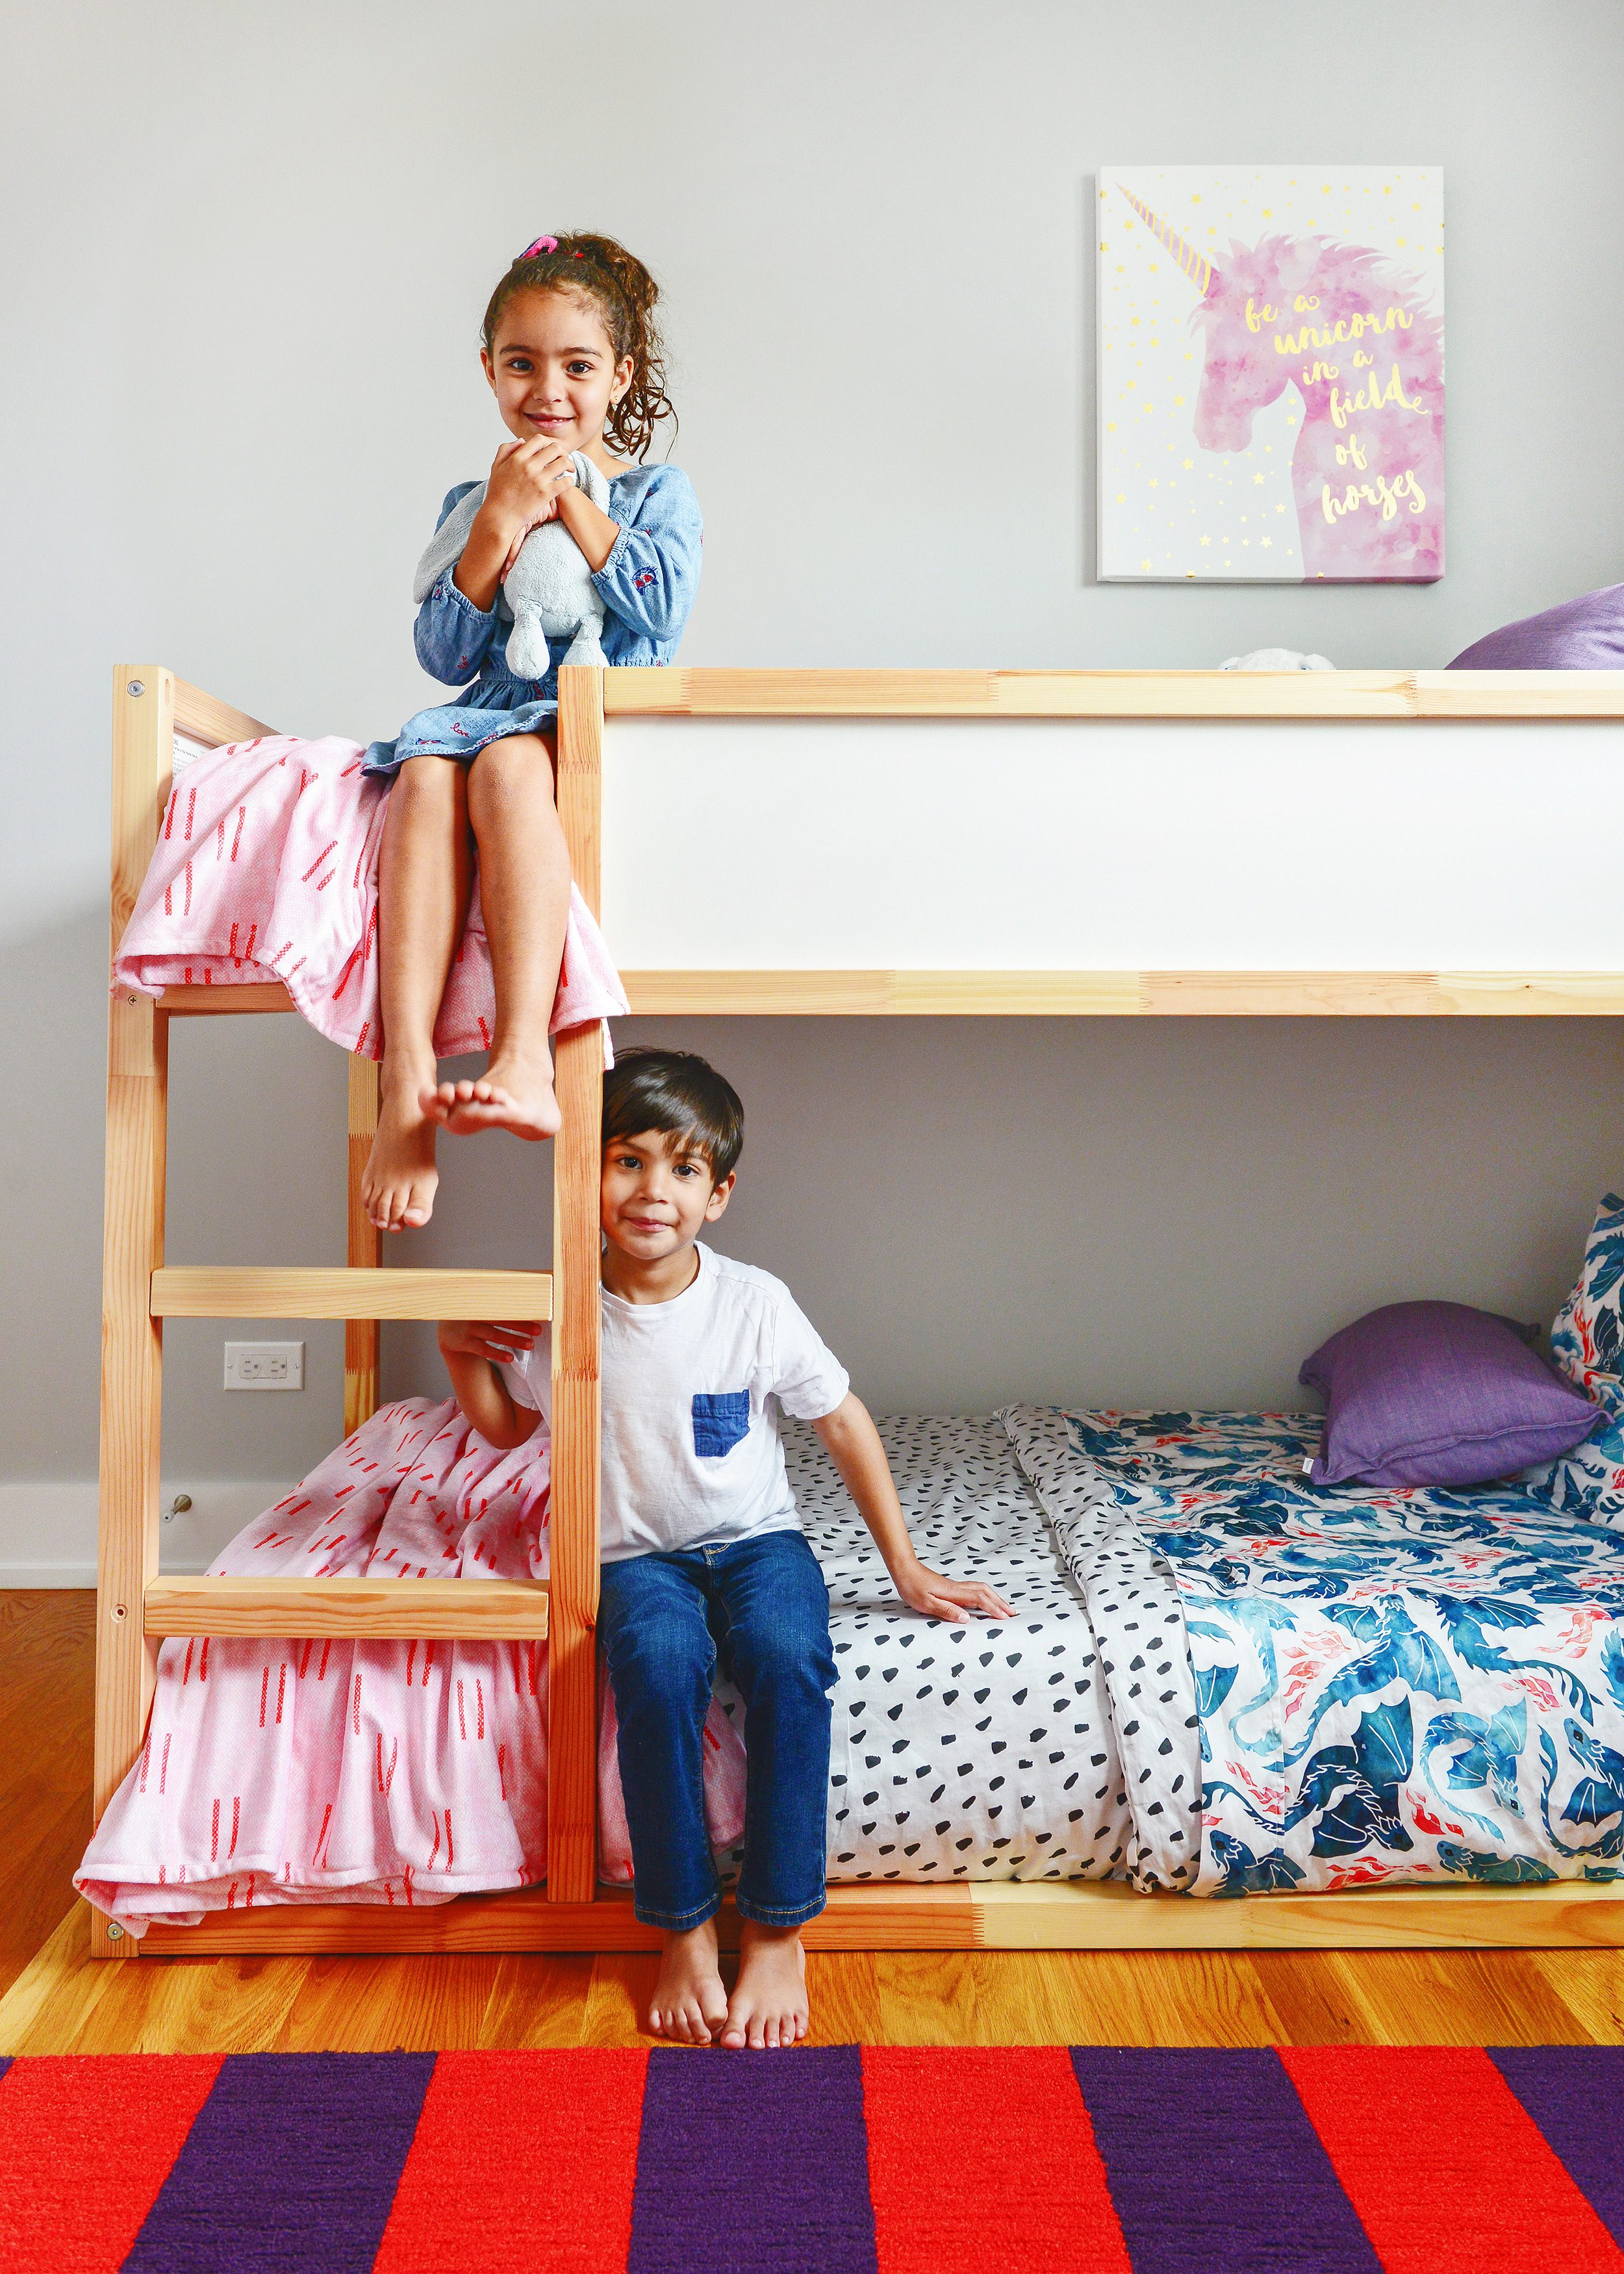 A bunk room makeover for a brother and sister in collaboration with Spoonflower! // a kids' room refresh // via Yellow Brick Home